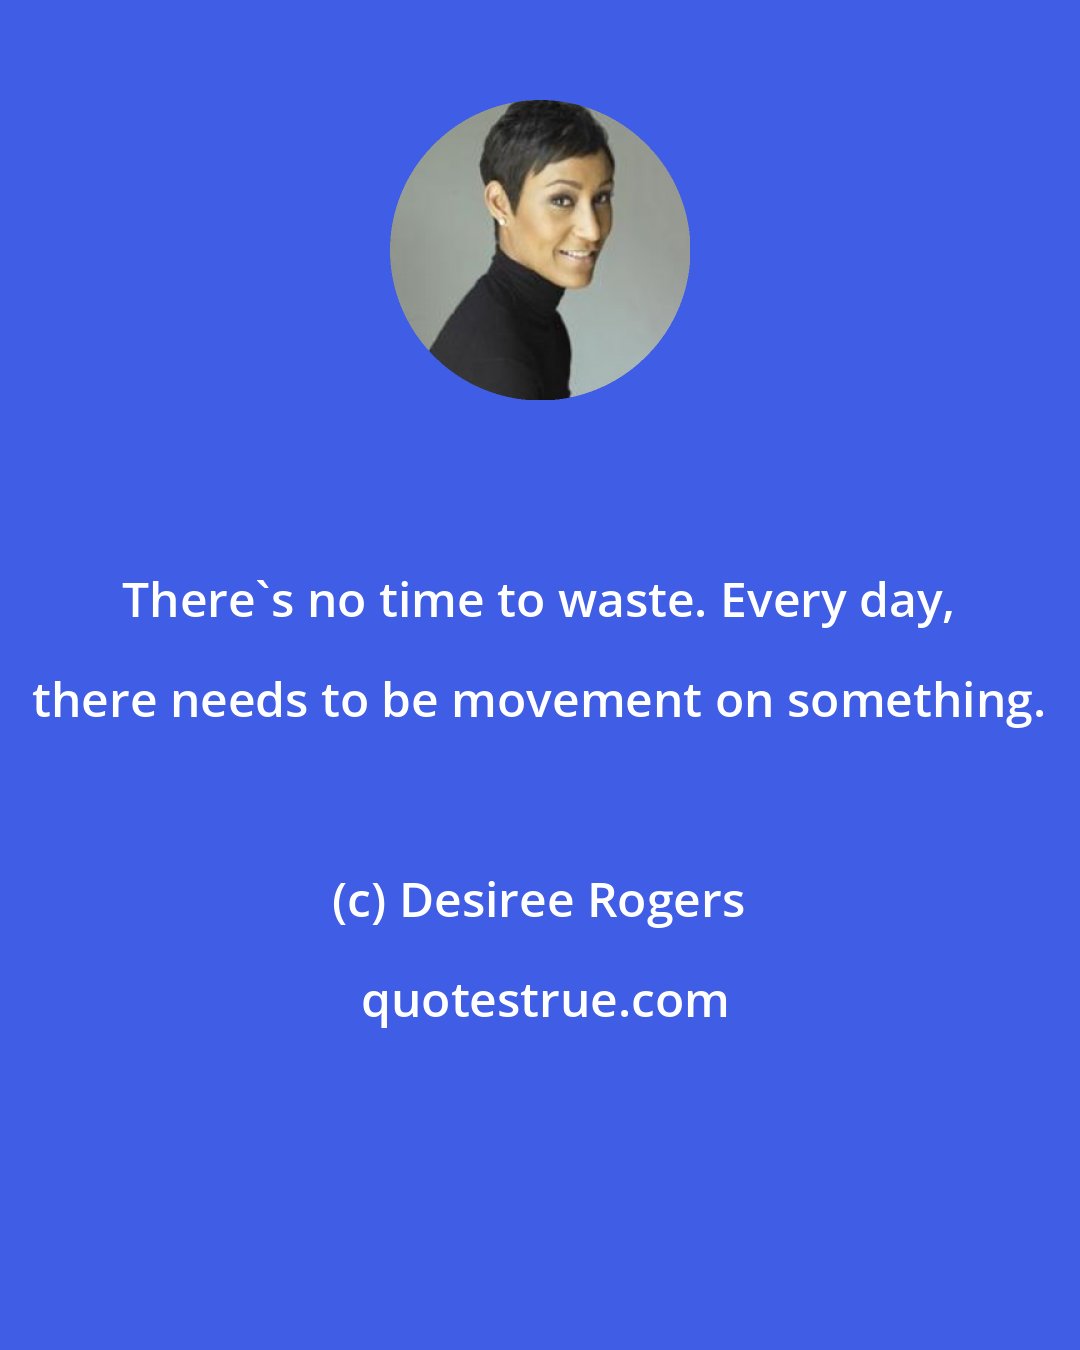 Desiree Rogers: There's no time to waste. Every day, there needs to be movement on something.